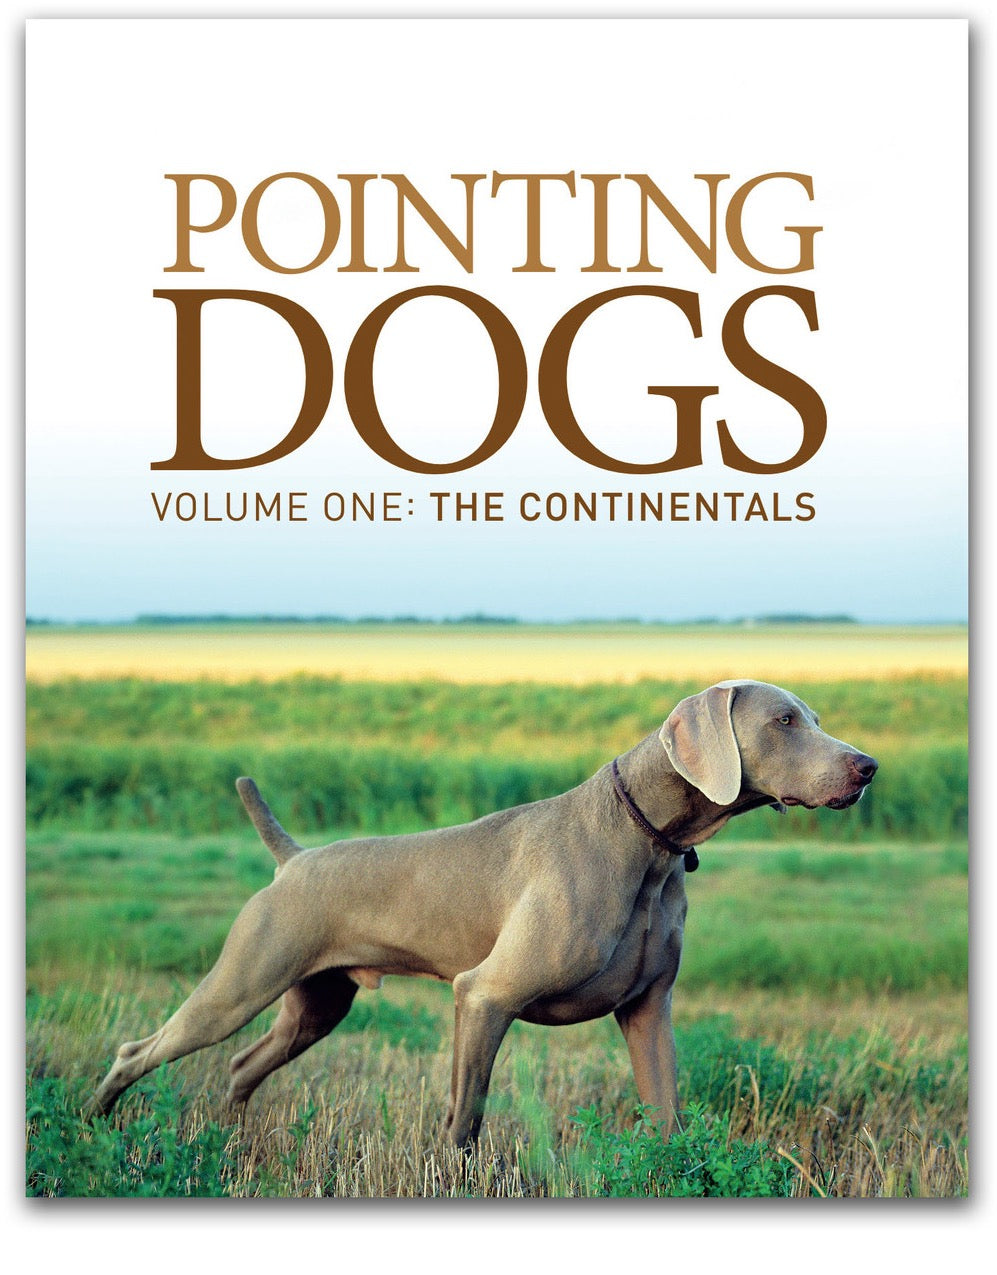 Pointing Dogs Volume One: The Continentals